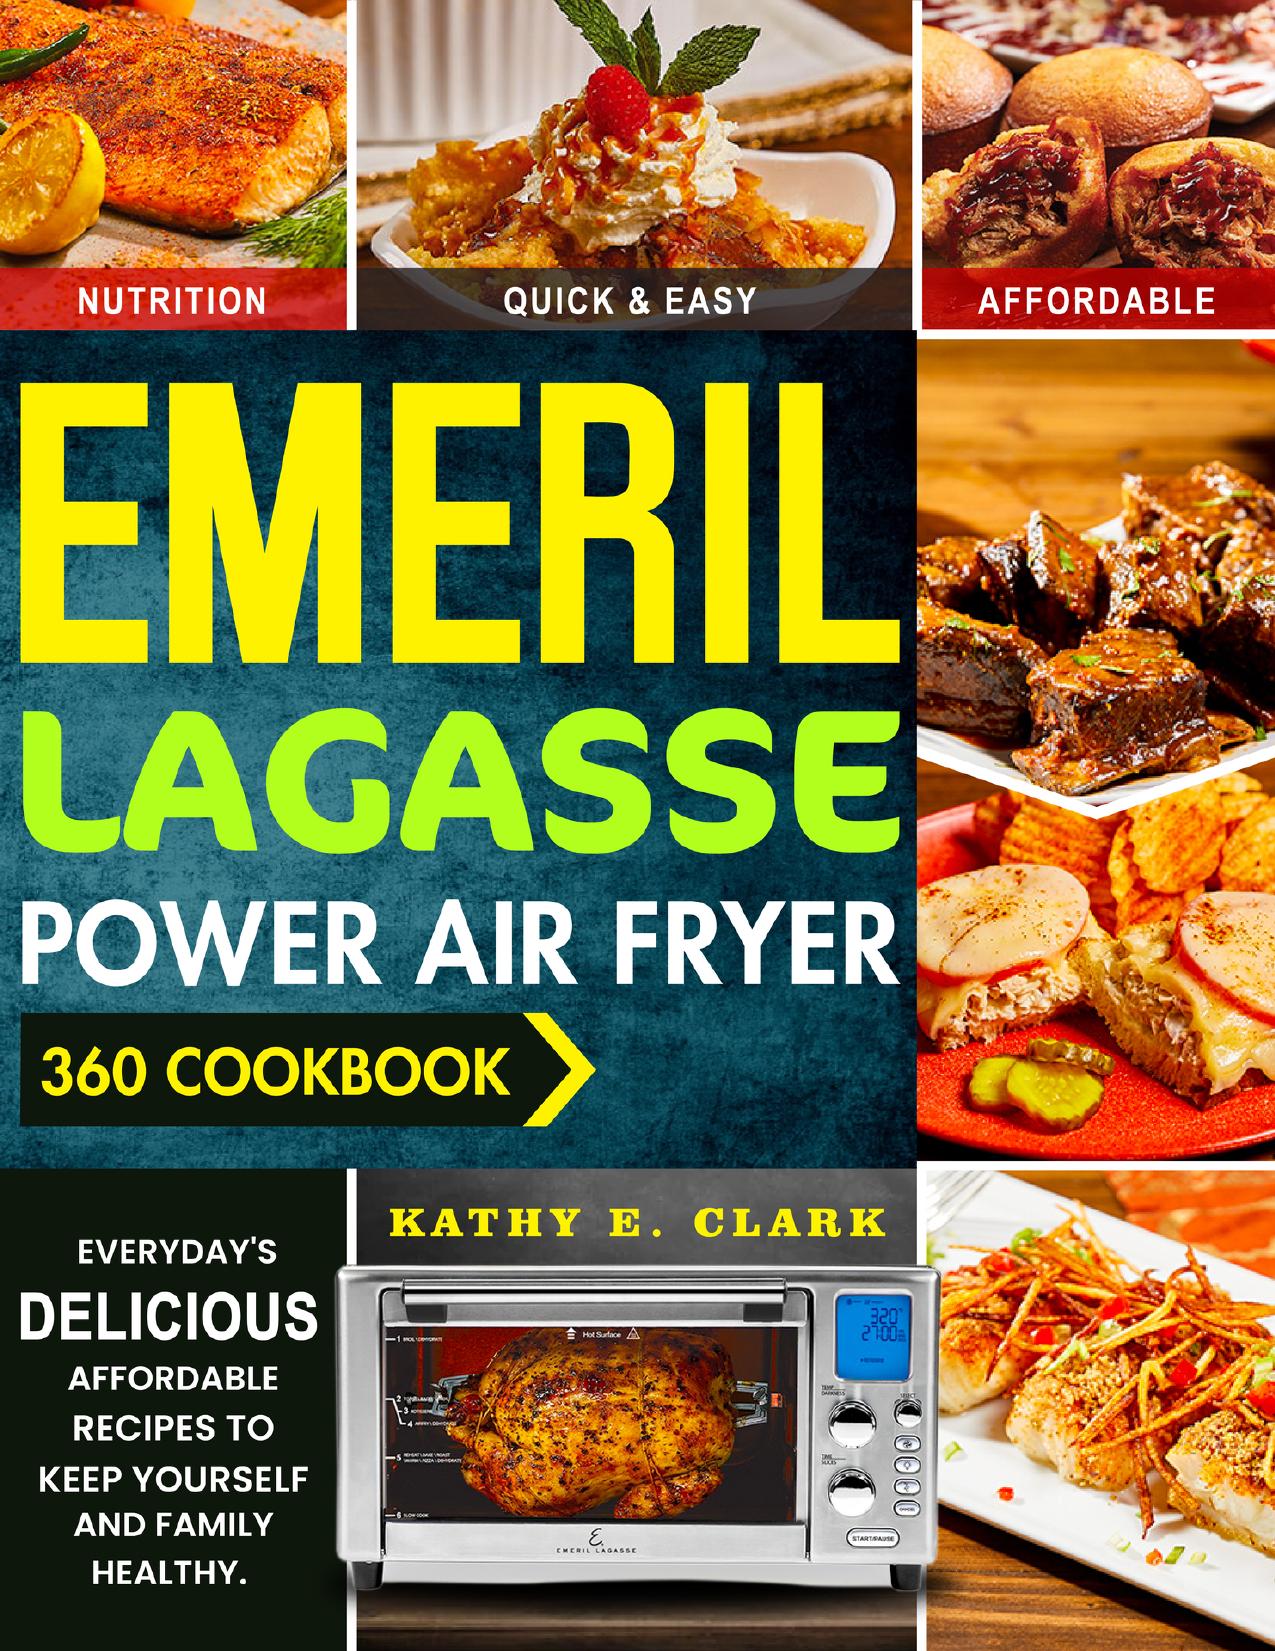 Emeril Lagasse Power Air Fryer 360 Cookbook: Budget-Friendly Tasty Recipes for Your Family. Keep Yourself Healthy and Have a Happy Lifestyle by Clark Kathy E